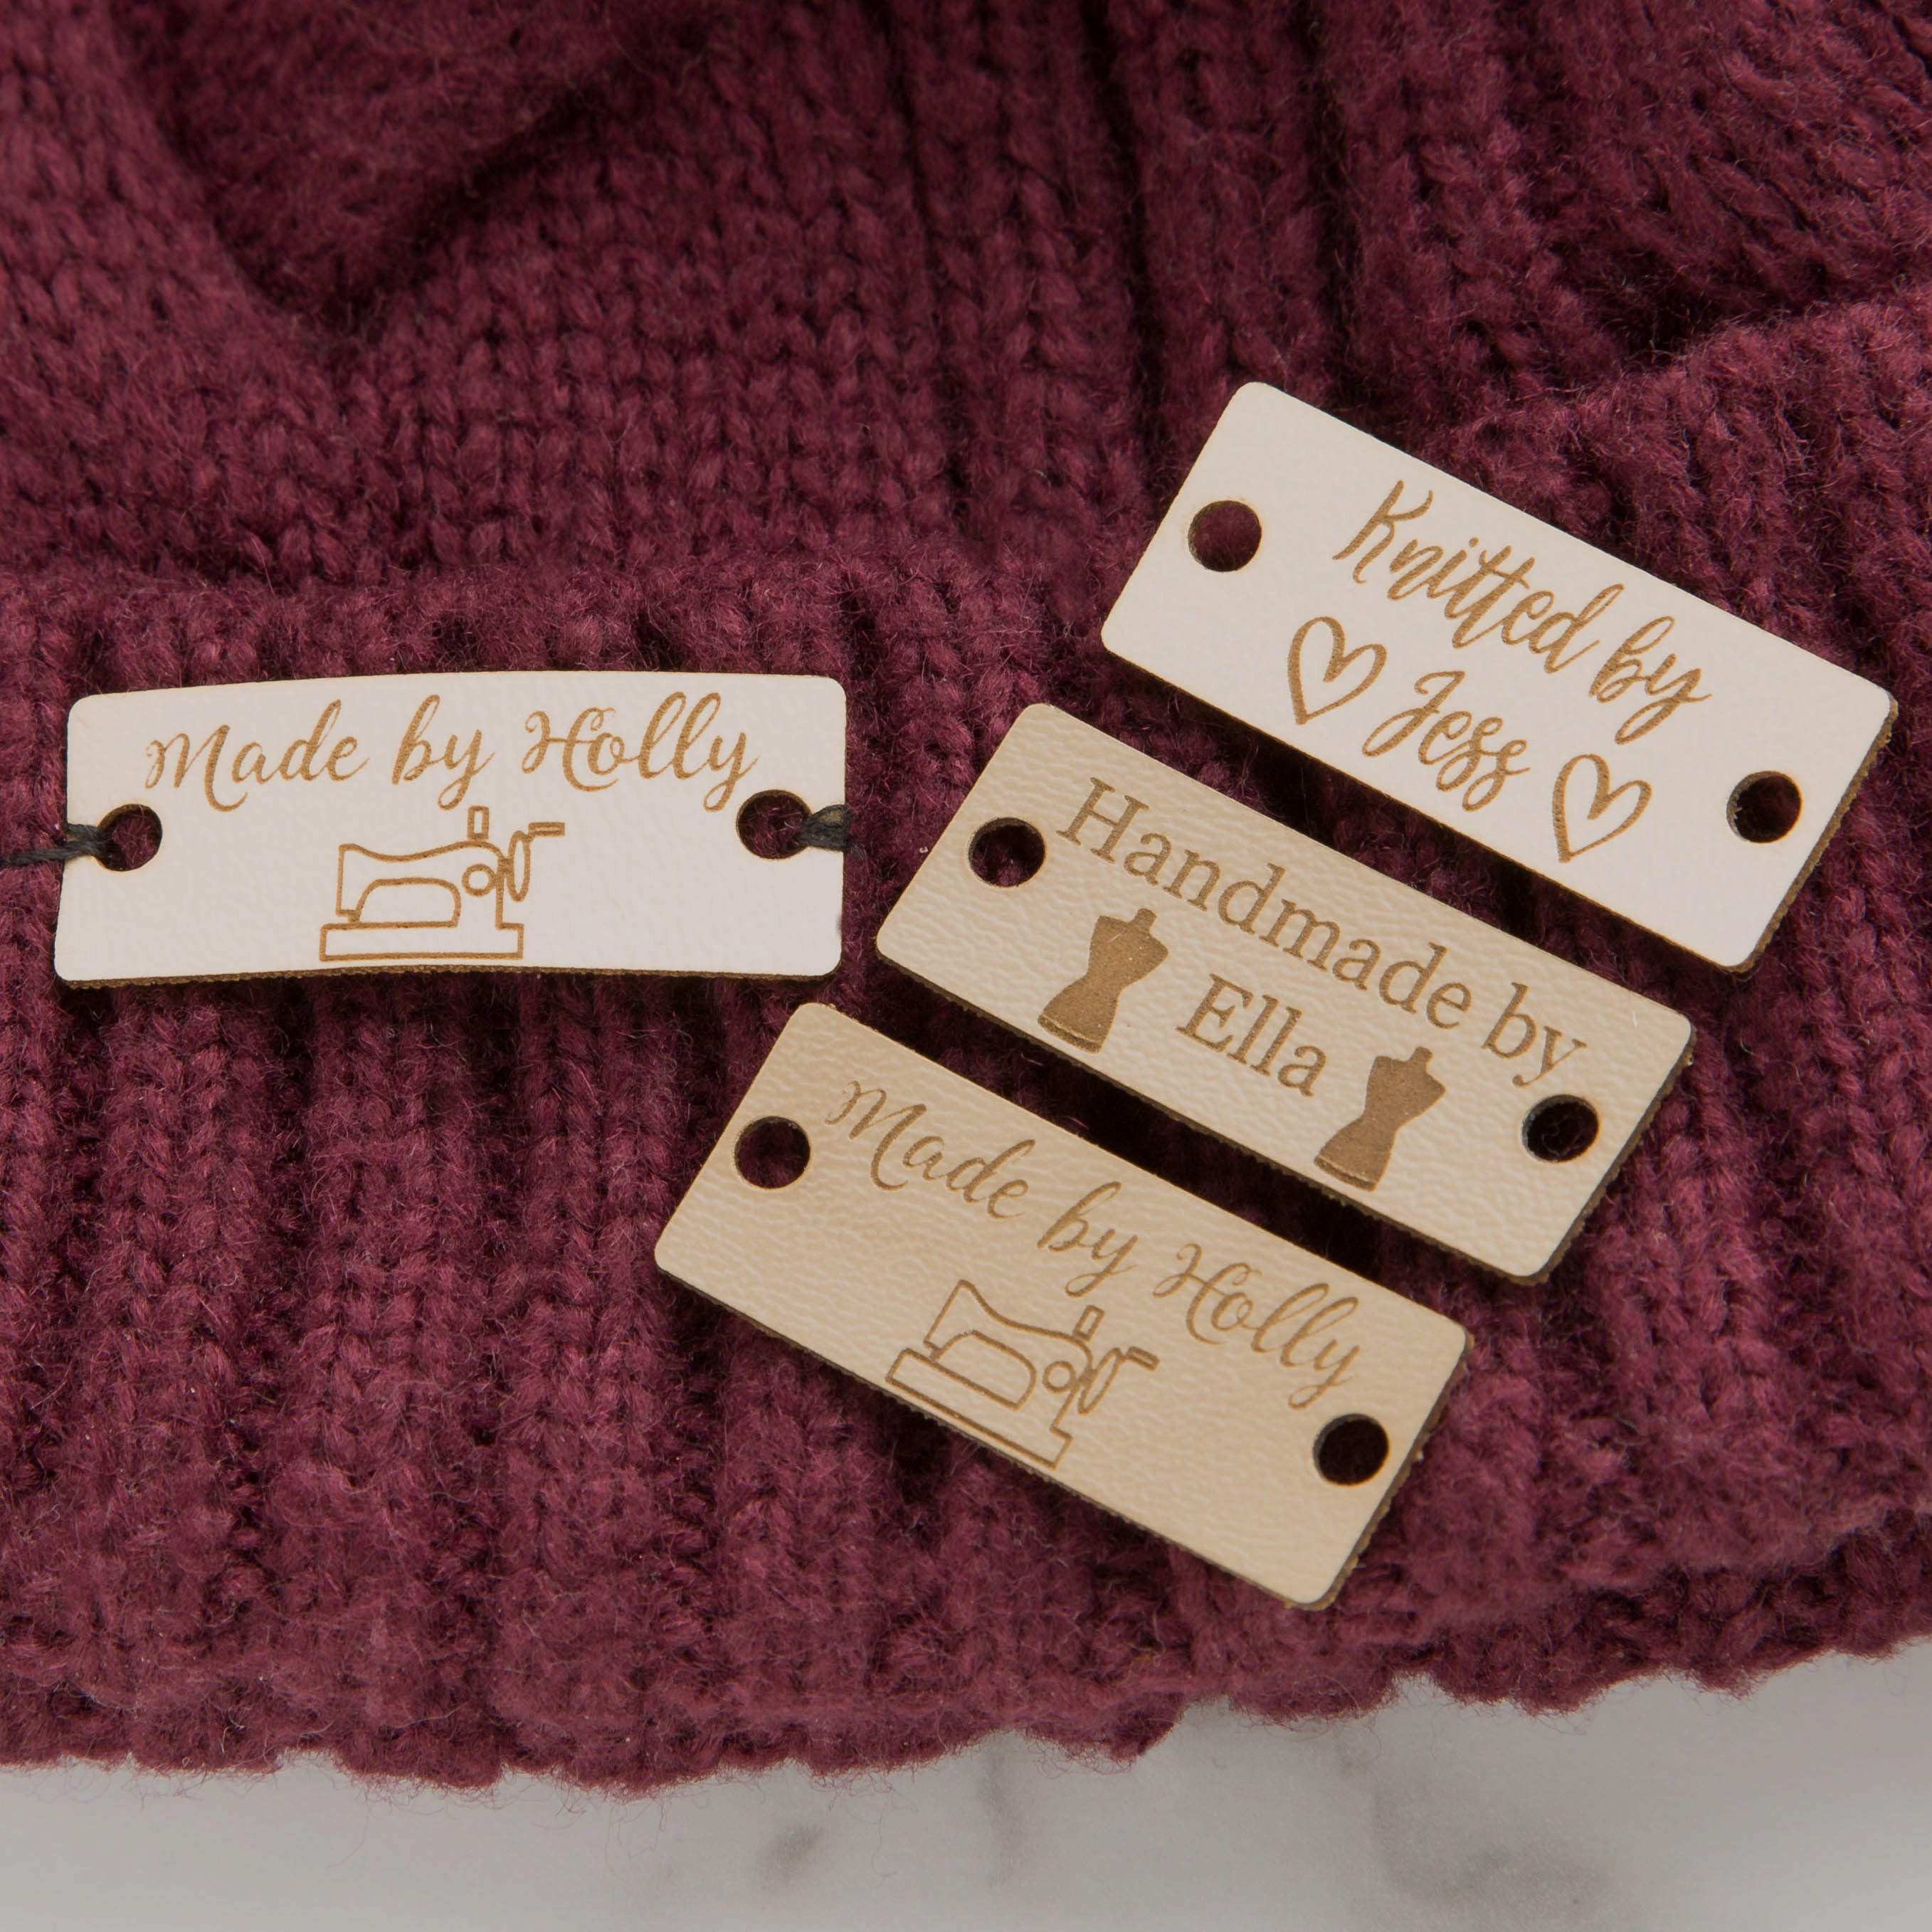 Personalised Sqaure Oak Handmade By Knitting and Crochet Tag